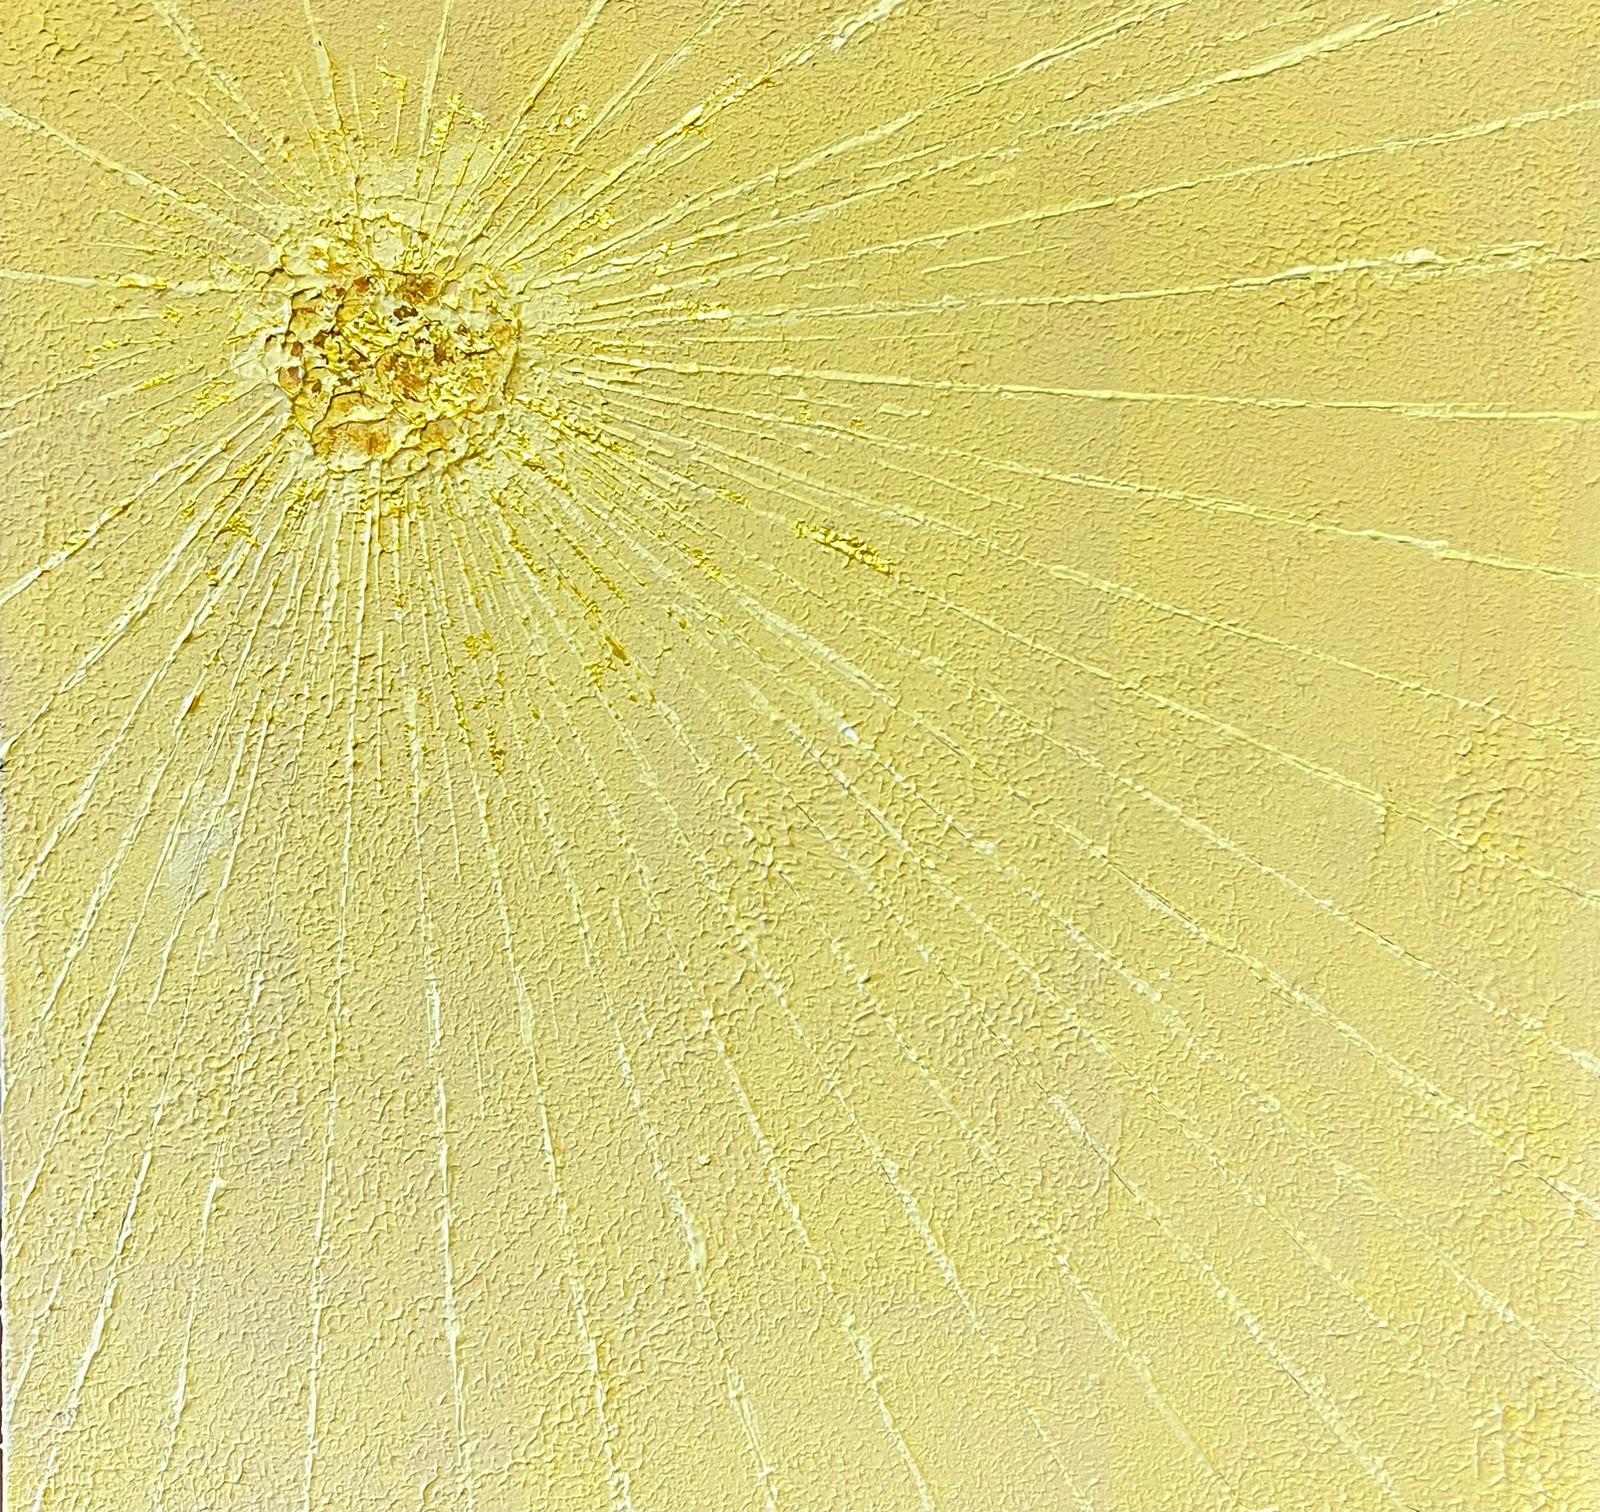 Contemporary British  Abstract Painting - Yellow Sun British Symbolist Oil Painting on Canvas Bright Yellow Thick Paint